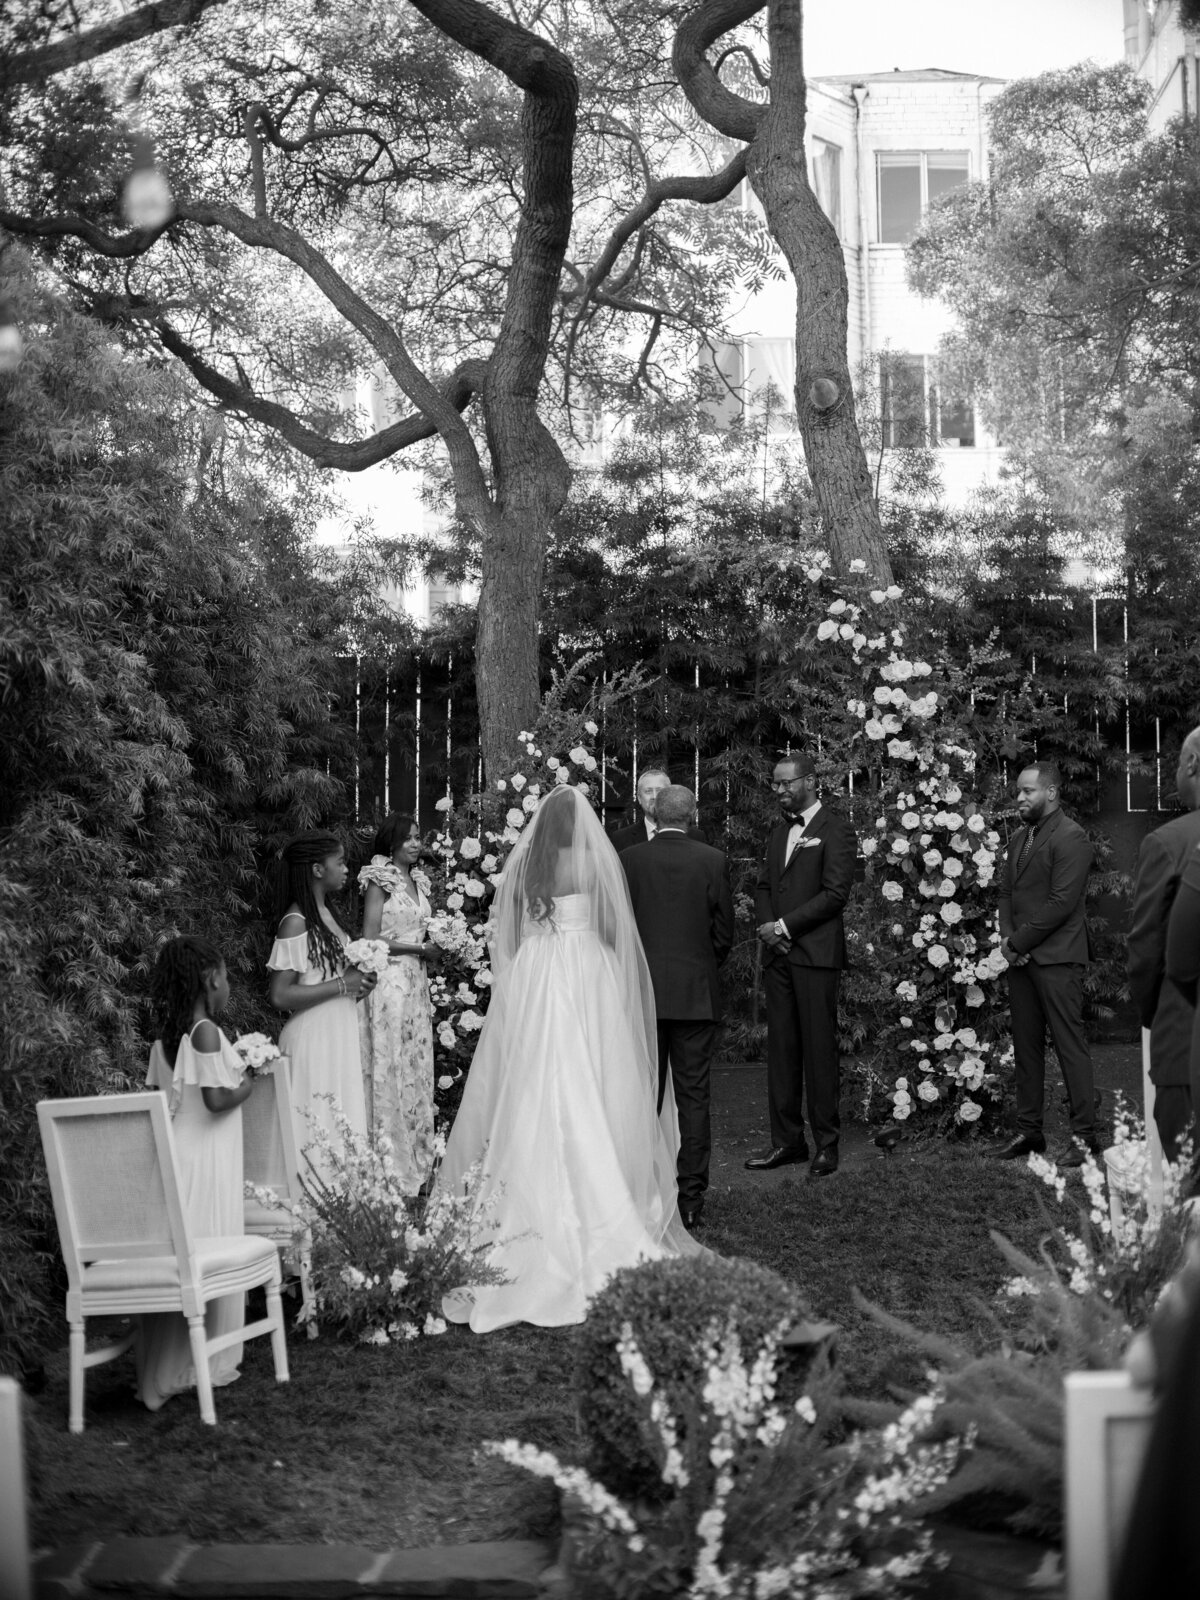 black couple getting married at private  venue with family and friends to witness in northern california backyard wedding ceremony.